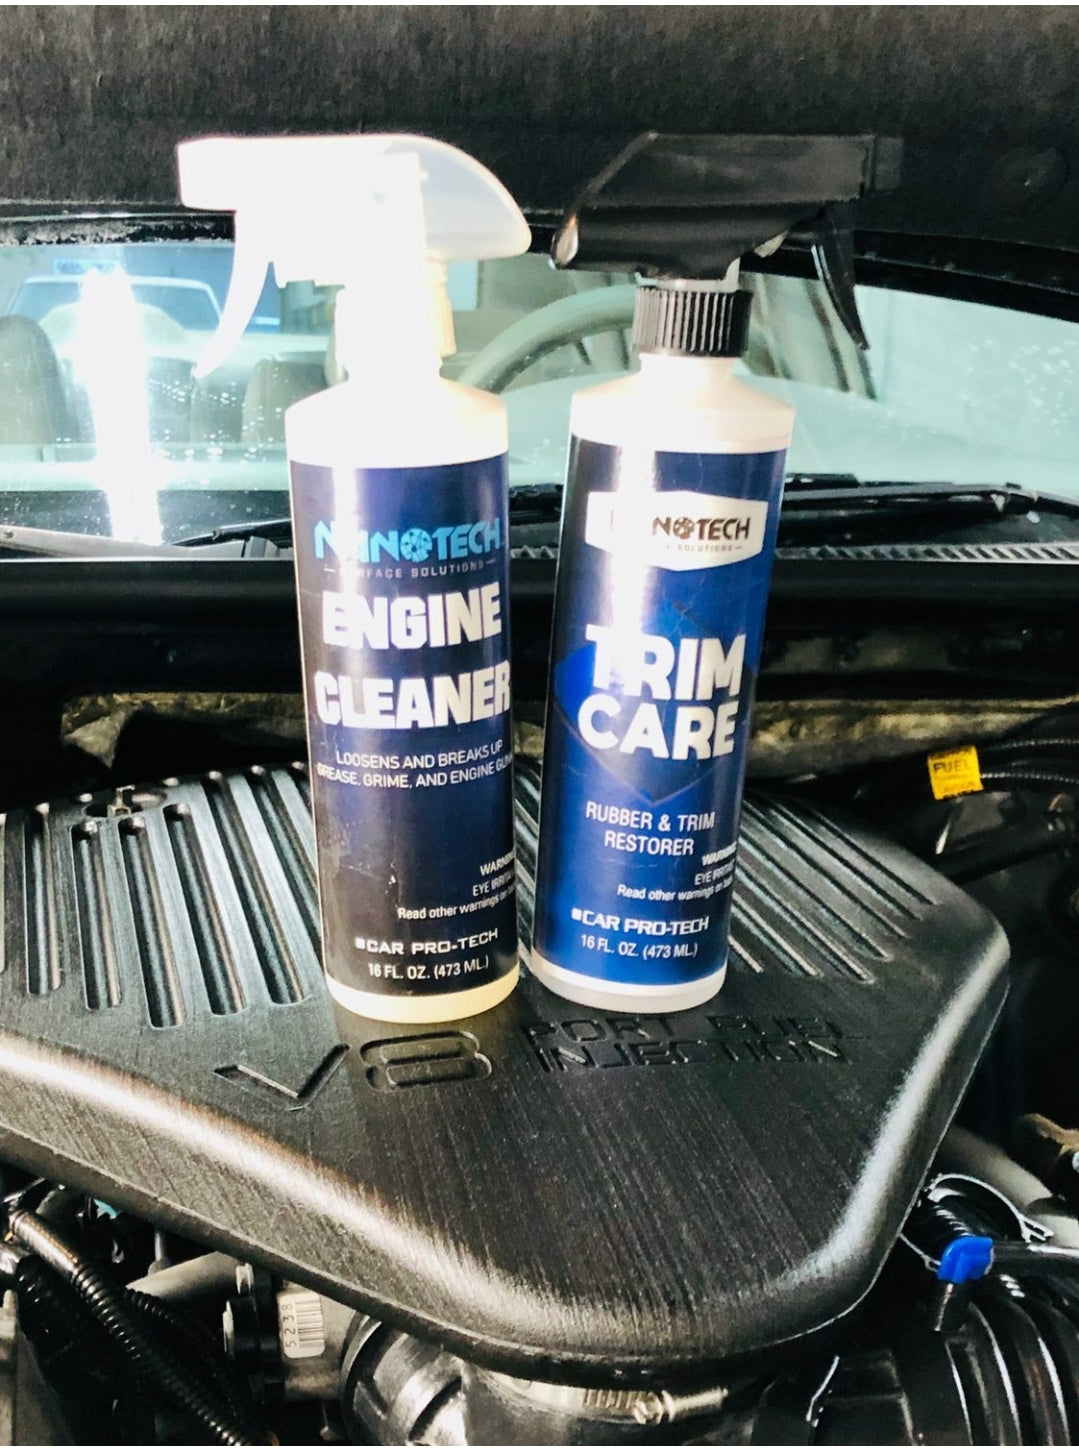  DURA-COATx Permanent Engine Bay Restorer Kit - Engine Bay  Cleaner - Trim Cleaner & Coating, Faded Plastic Restorer for a Long Lasting  Shine - Made in The USA (Cleaner & Coating